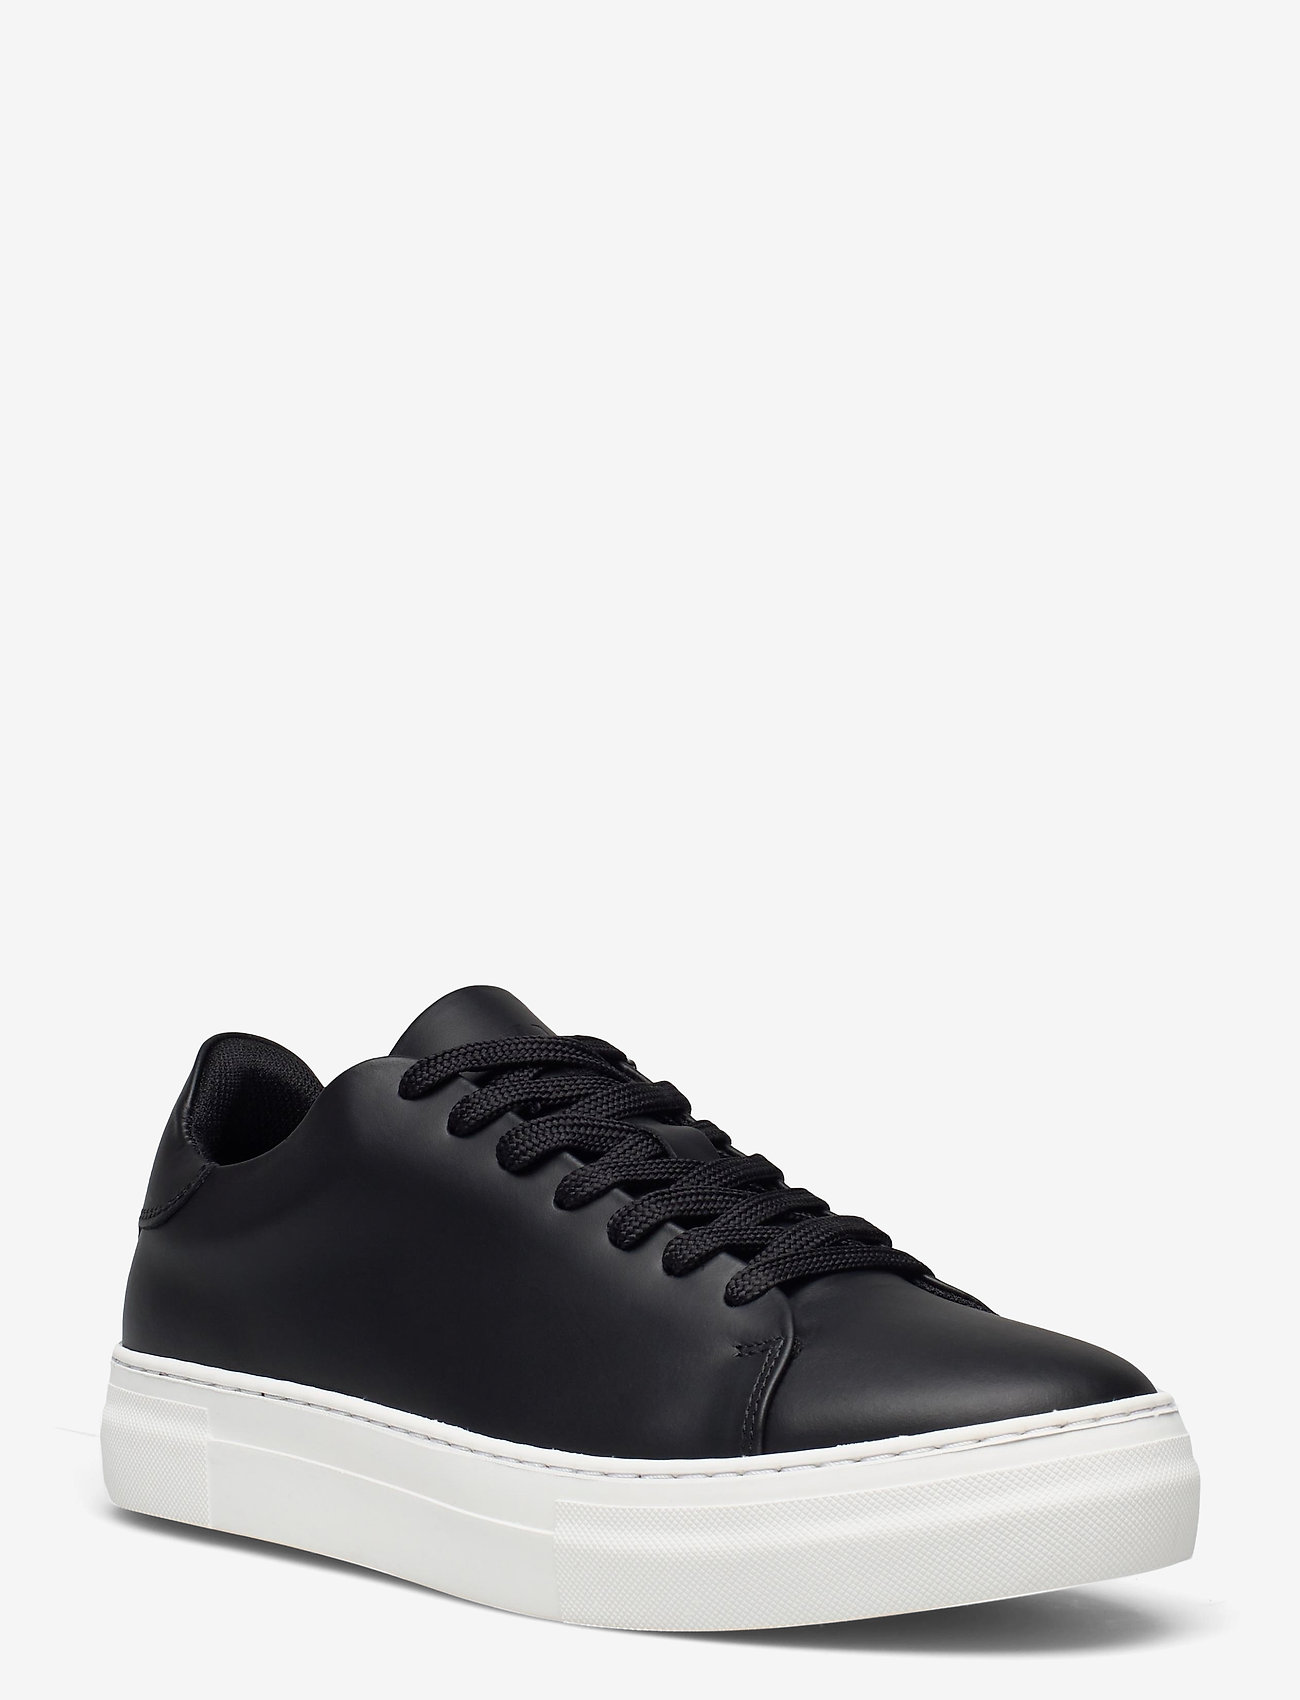 Selected Homme - SLHDAVID CHUNKY LEATHER SNEAKER NOOS O - lav ankel - black - 0